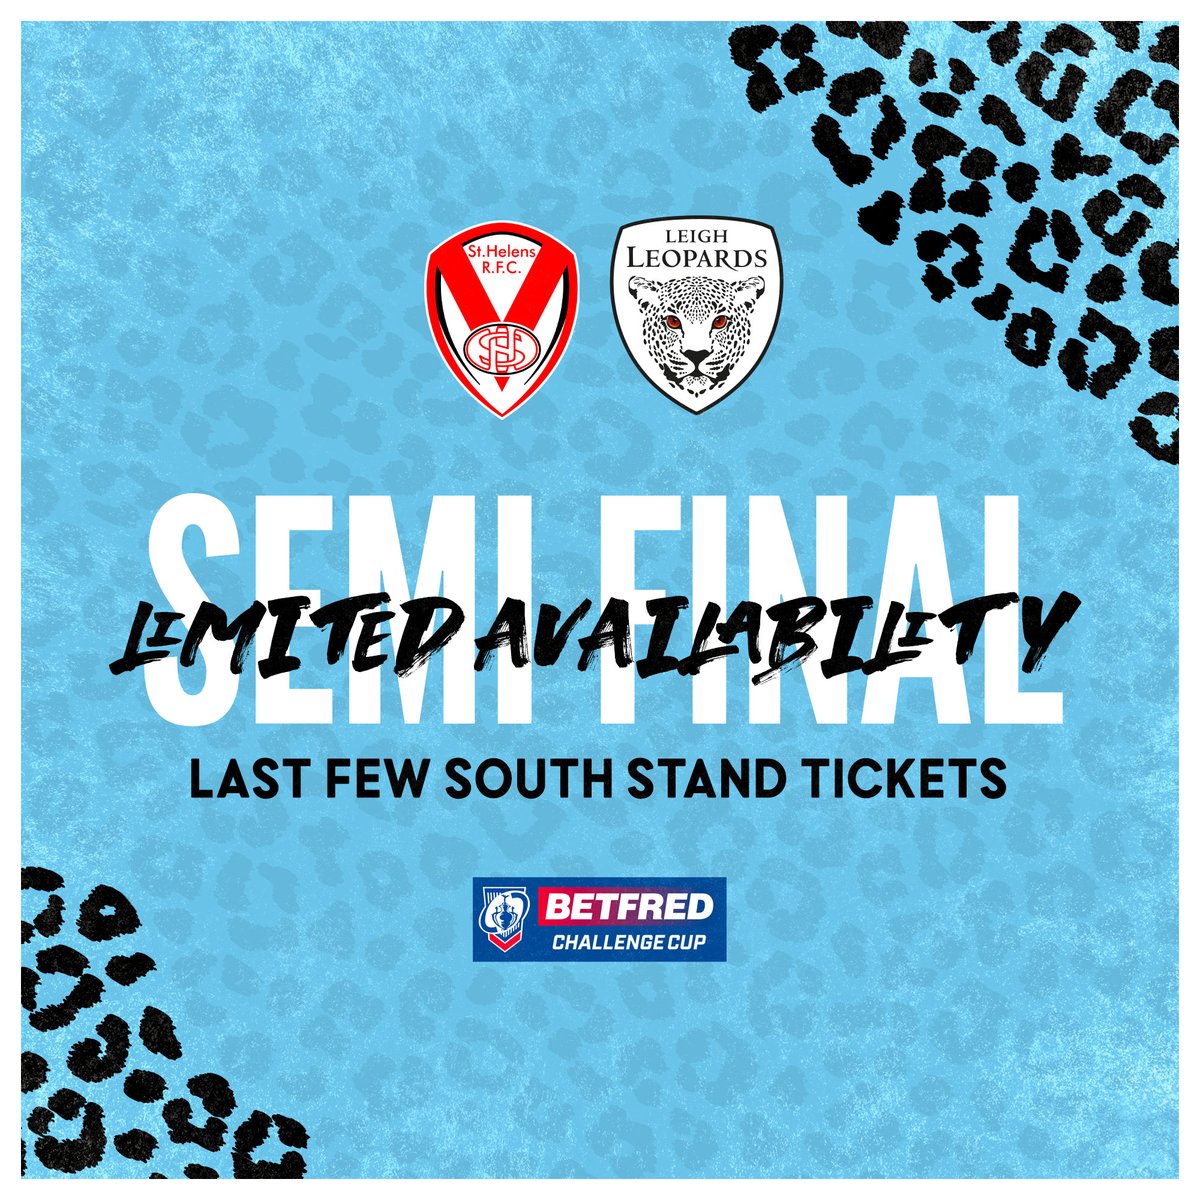 Have you secured your ticket yet? If not... WHY NOT? There are limited South Stand tickets left for our Semi Final clash with Saints. Do not miss out!

https://t.co/bIsqwUHgAd

#betheroar #leythers https://t.co/xDX8vhhowJ